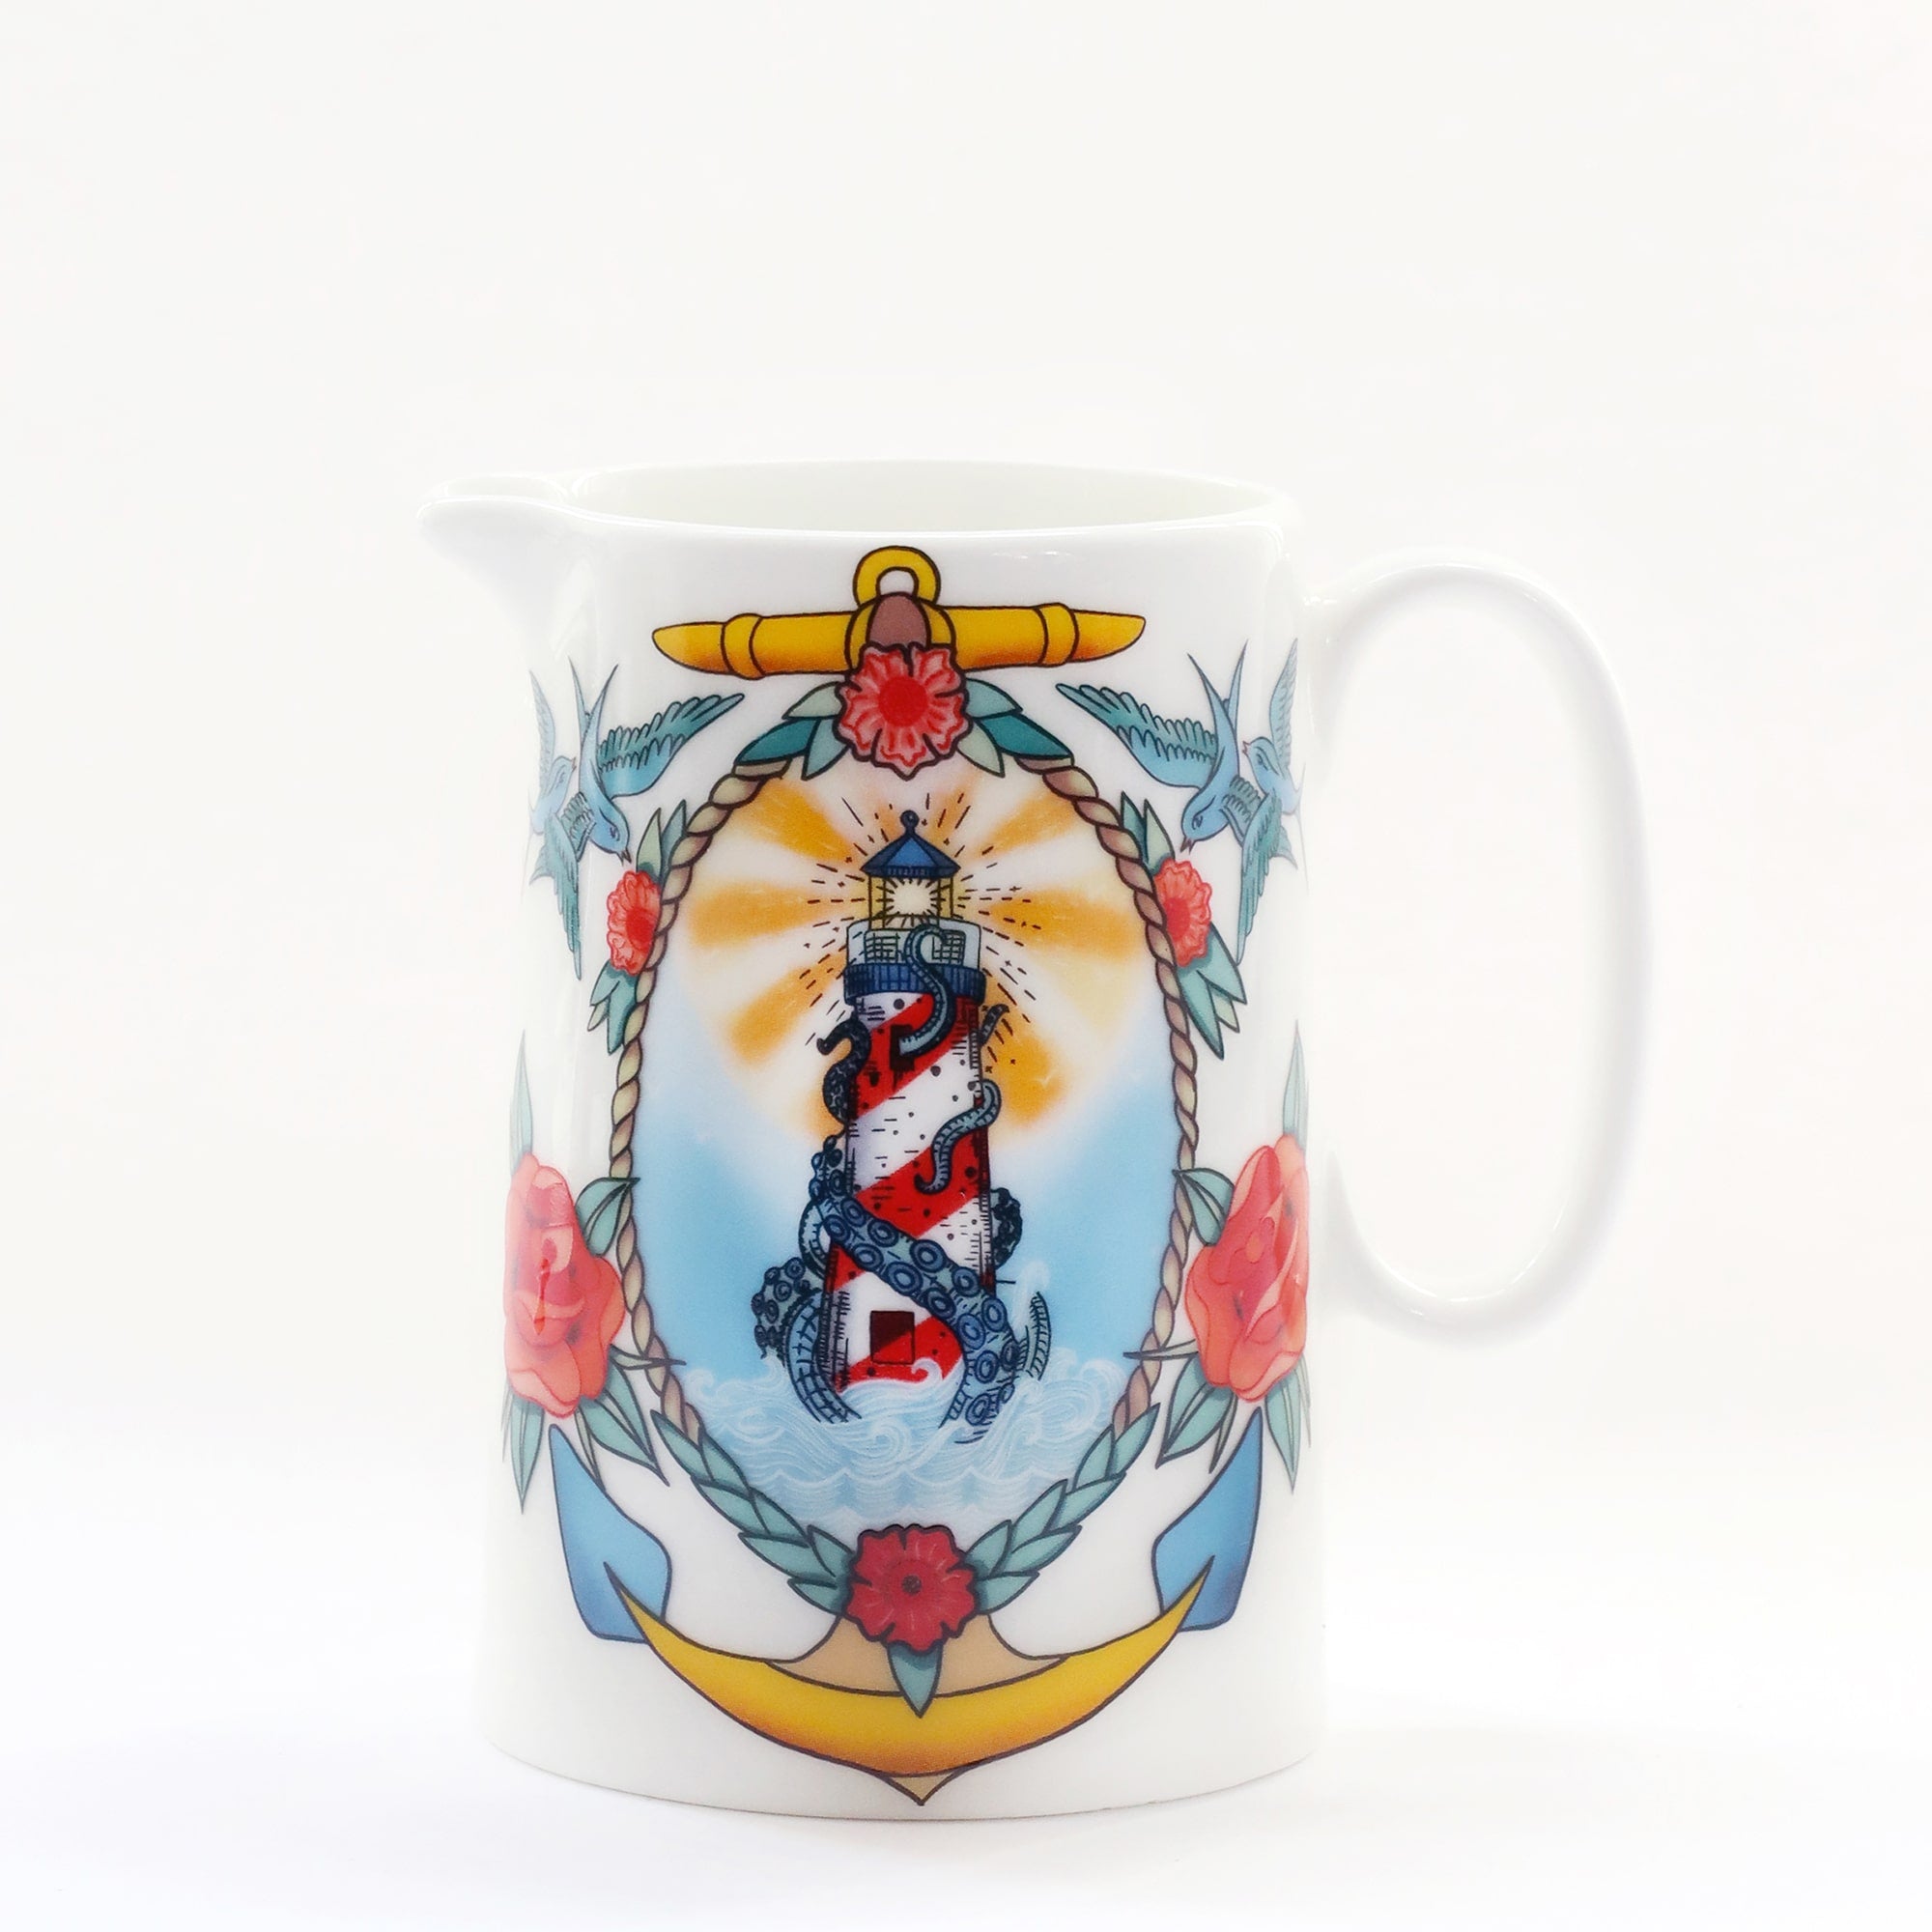 Product shot of a white jug with a lighthouse, kraken and roses design that is inspired by sailor's tattoos.